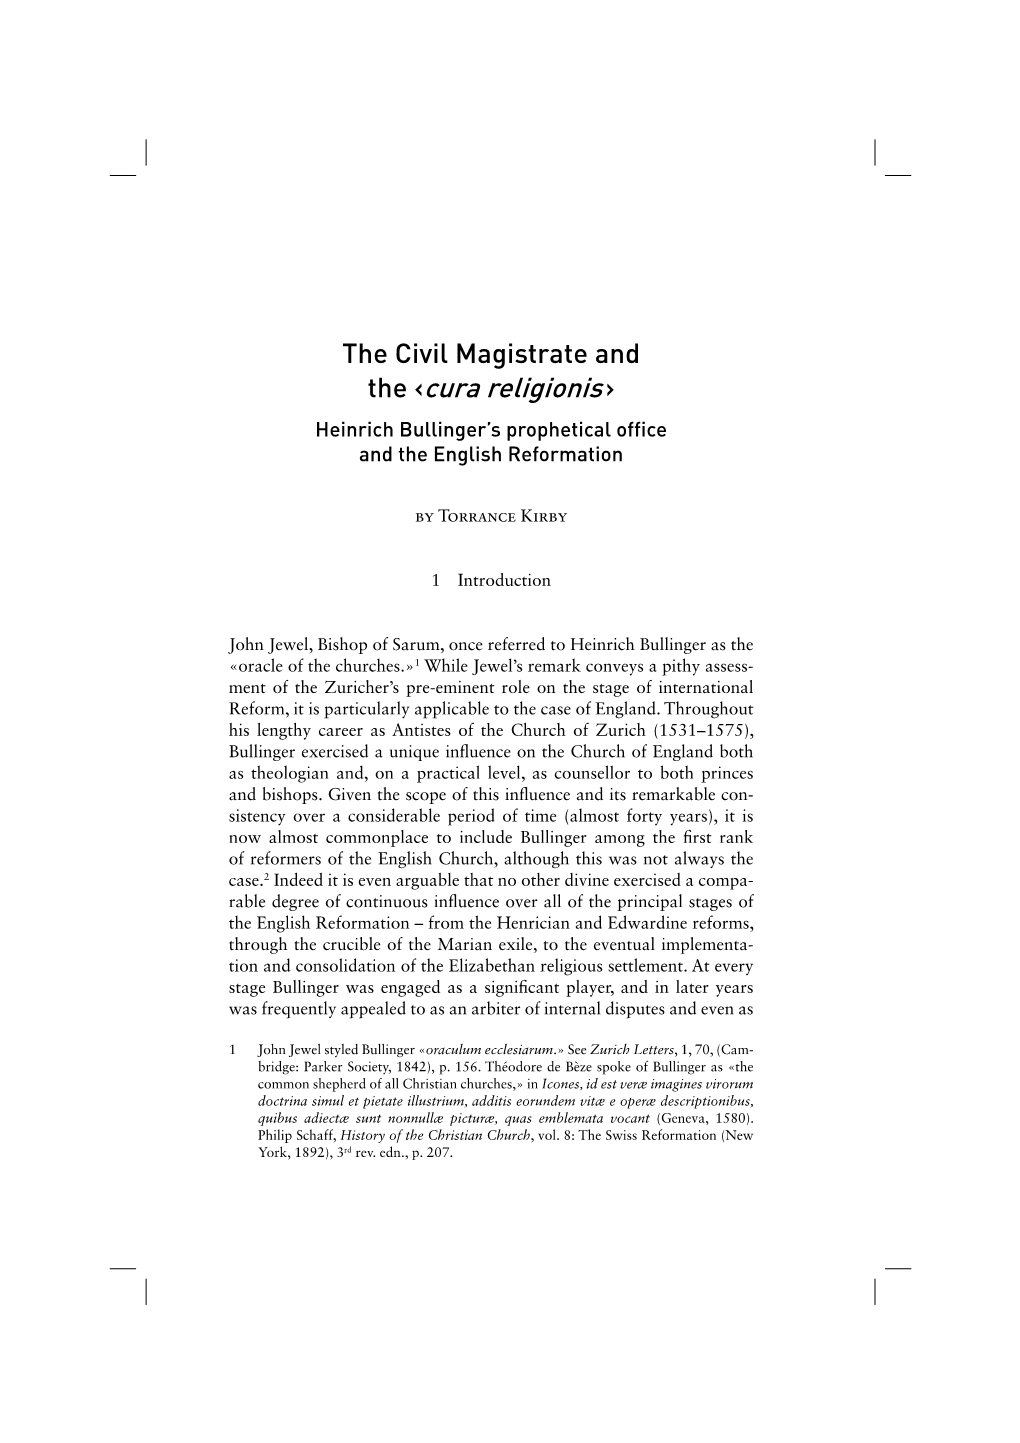 The Civil Magistrate and the ‹Cura Religionis › Heinrich Bullinger’S Prophetical Office and the English Reformation